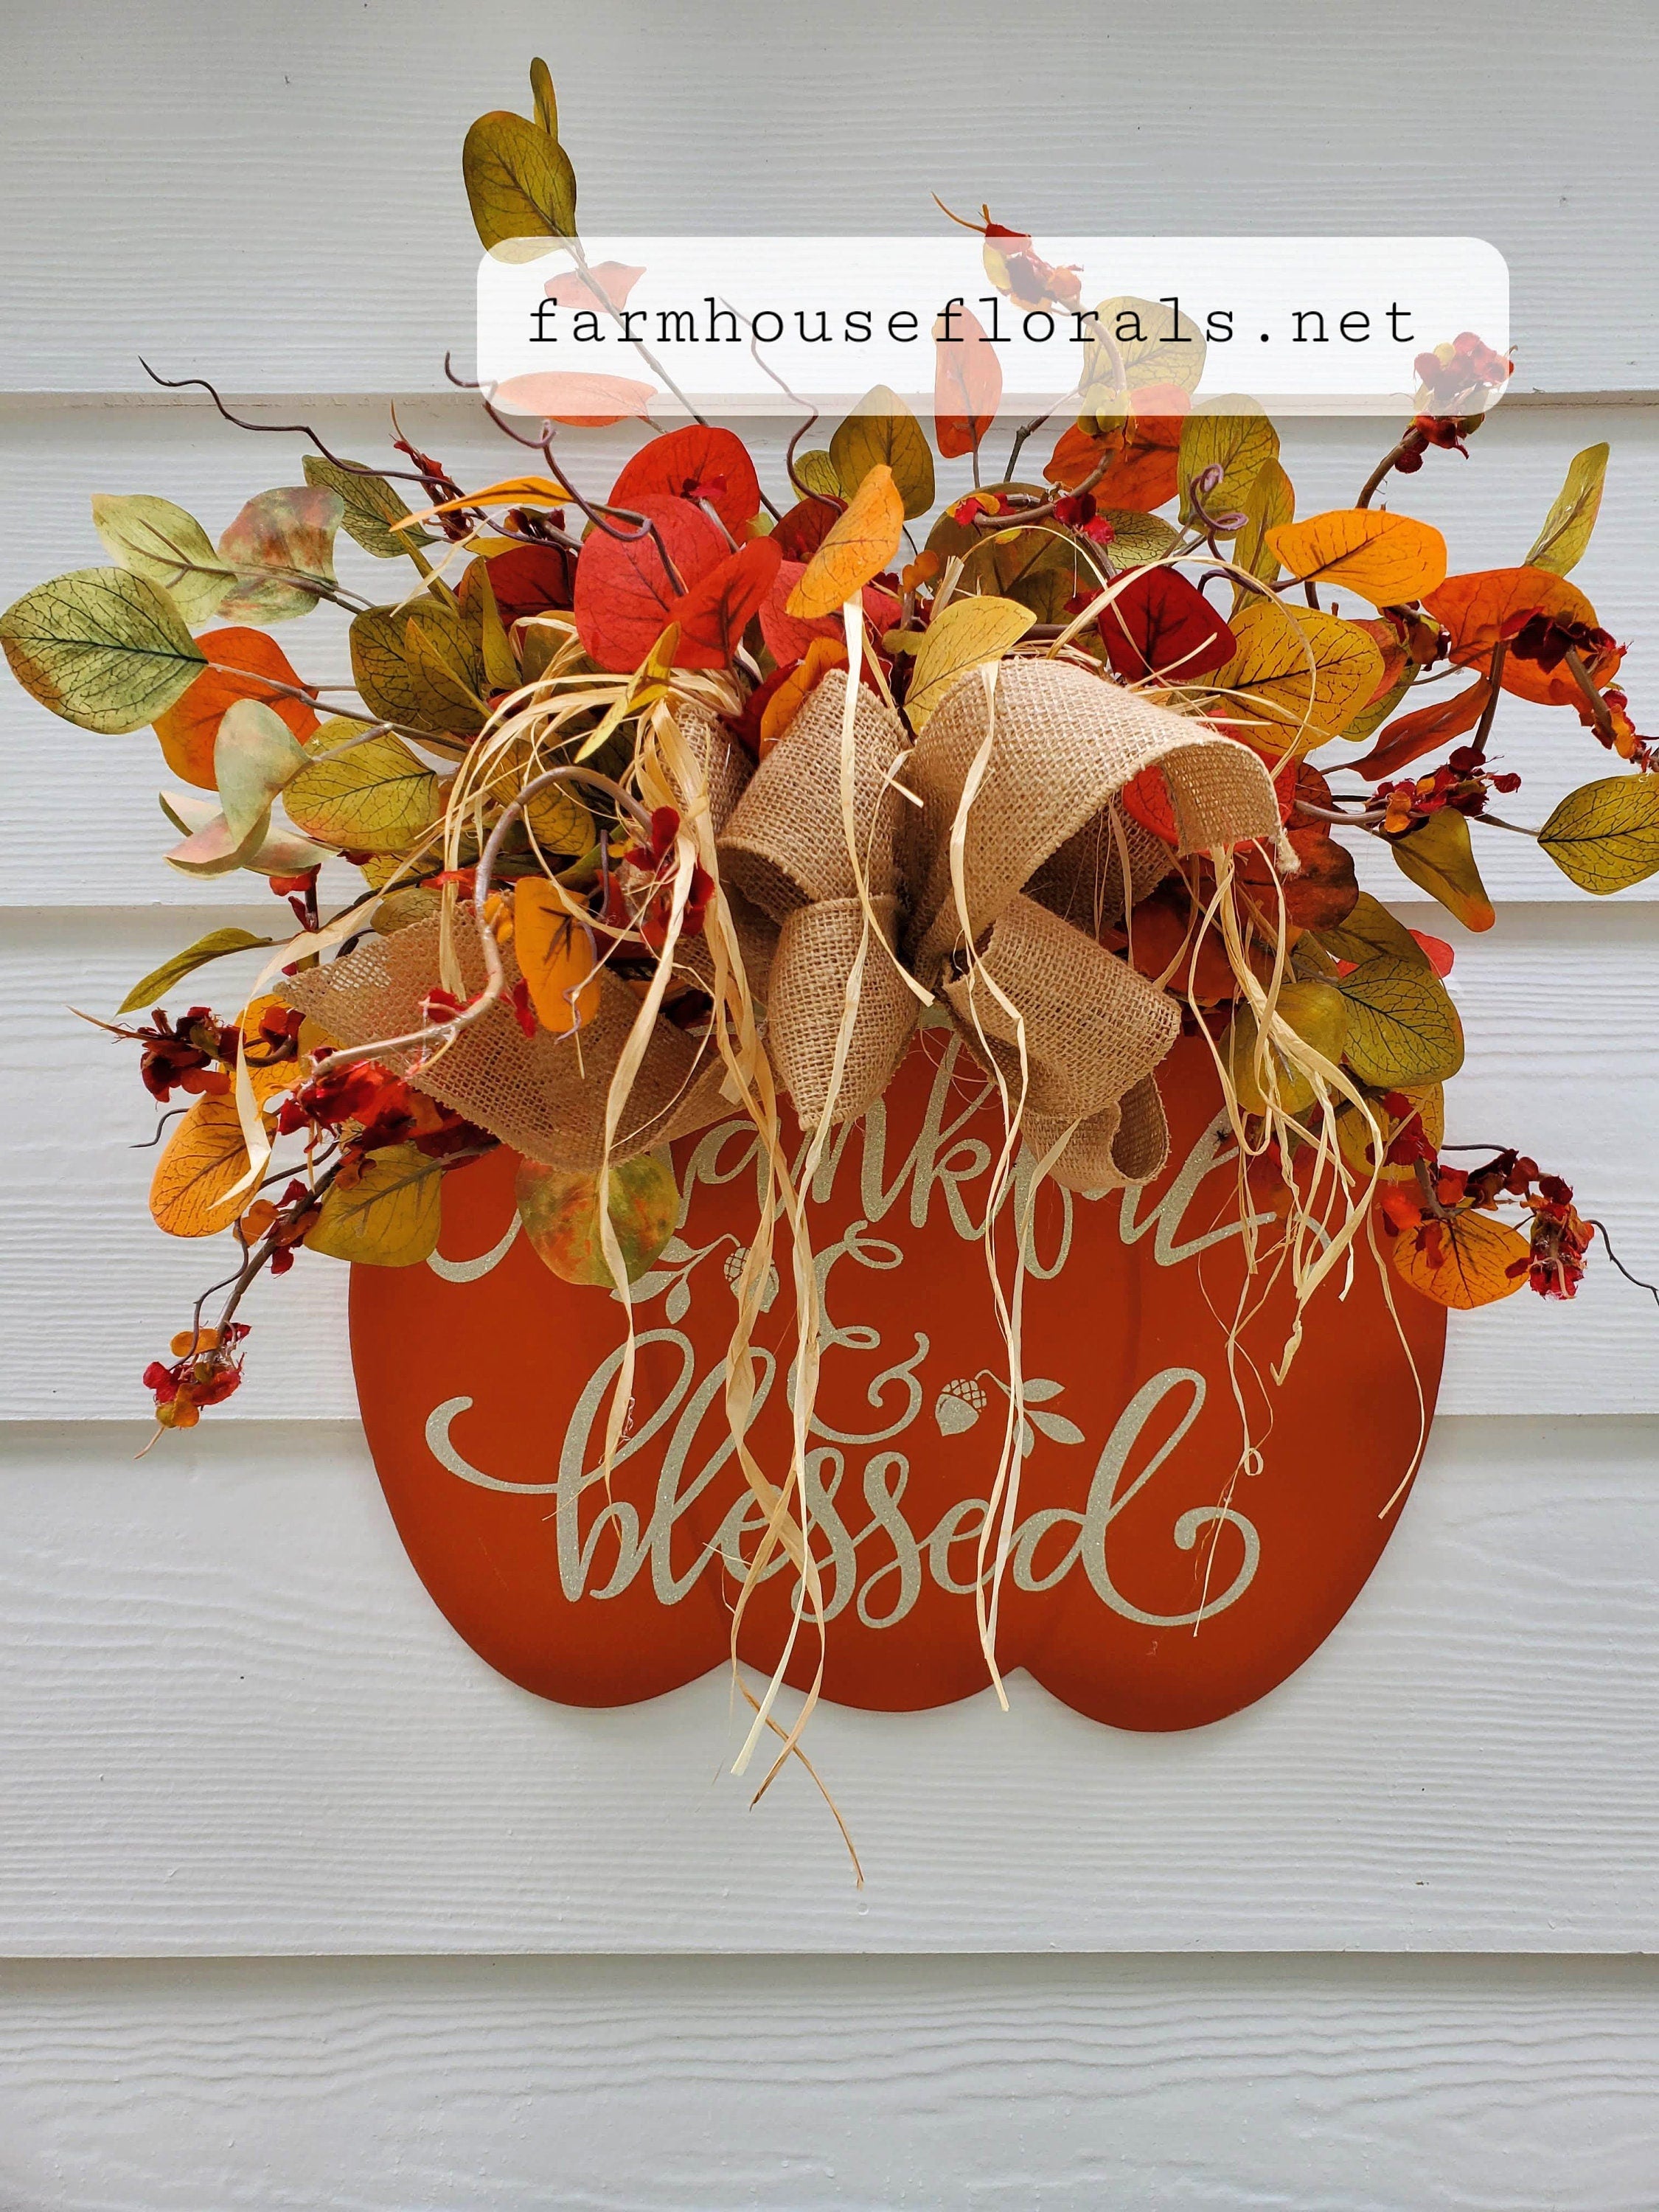 Front Door Decor, Thankful & Blessed, Thanksgiving Decor, Fall Door Decor, Door Hanger, Door Wreath,Housewarming Gift, Home Decor